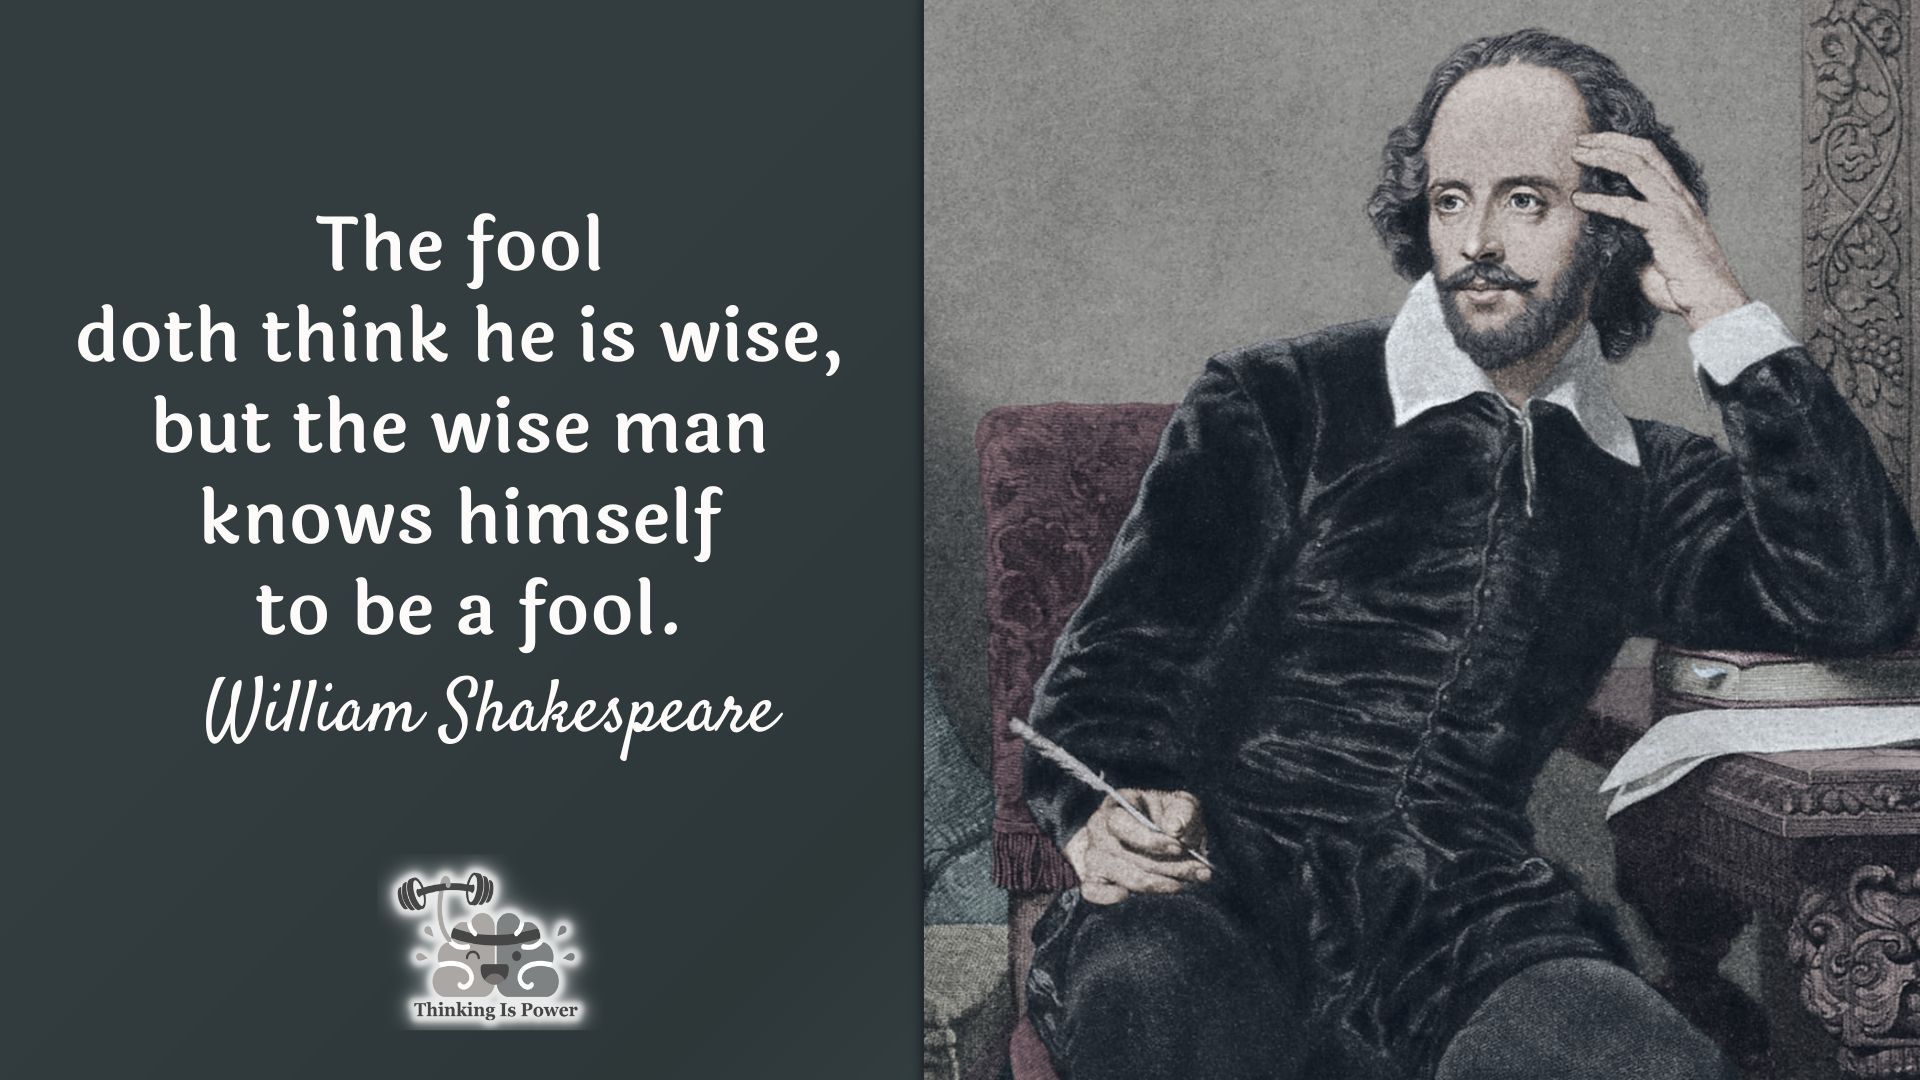 Shakespeare quote The fool doth think he is wise, but the wise man knows himself to be a fool.